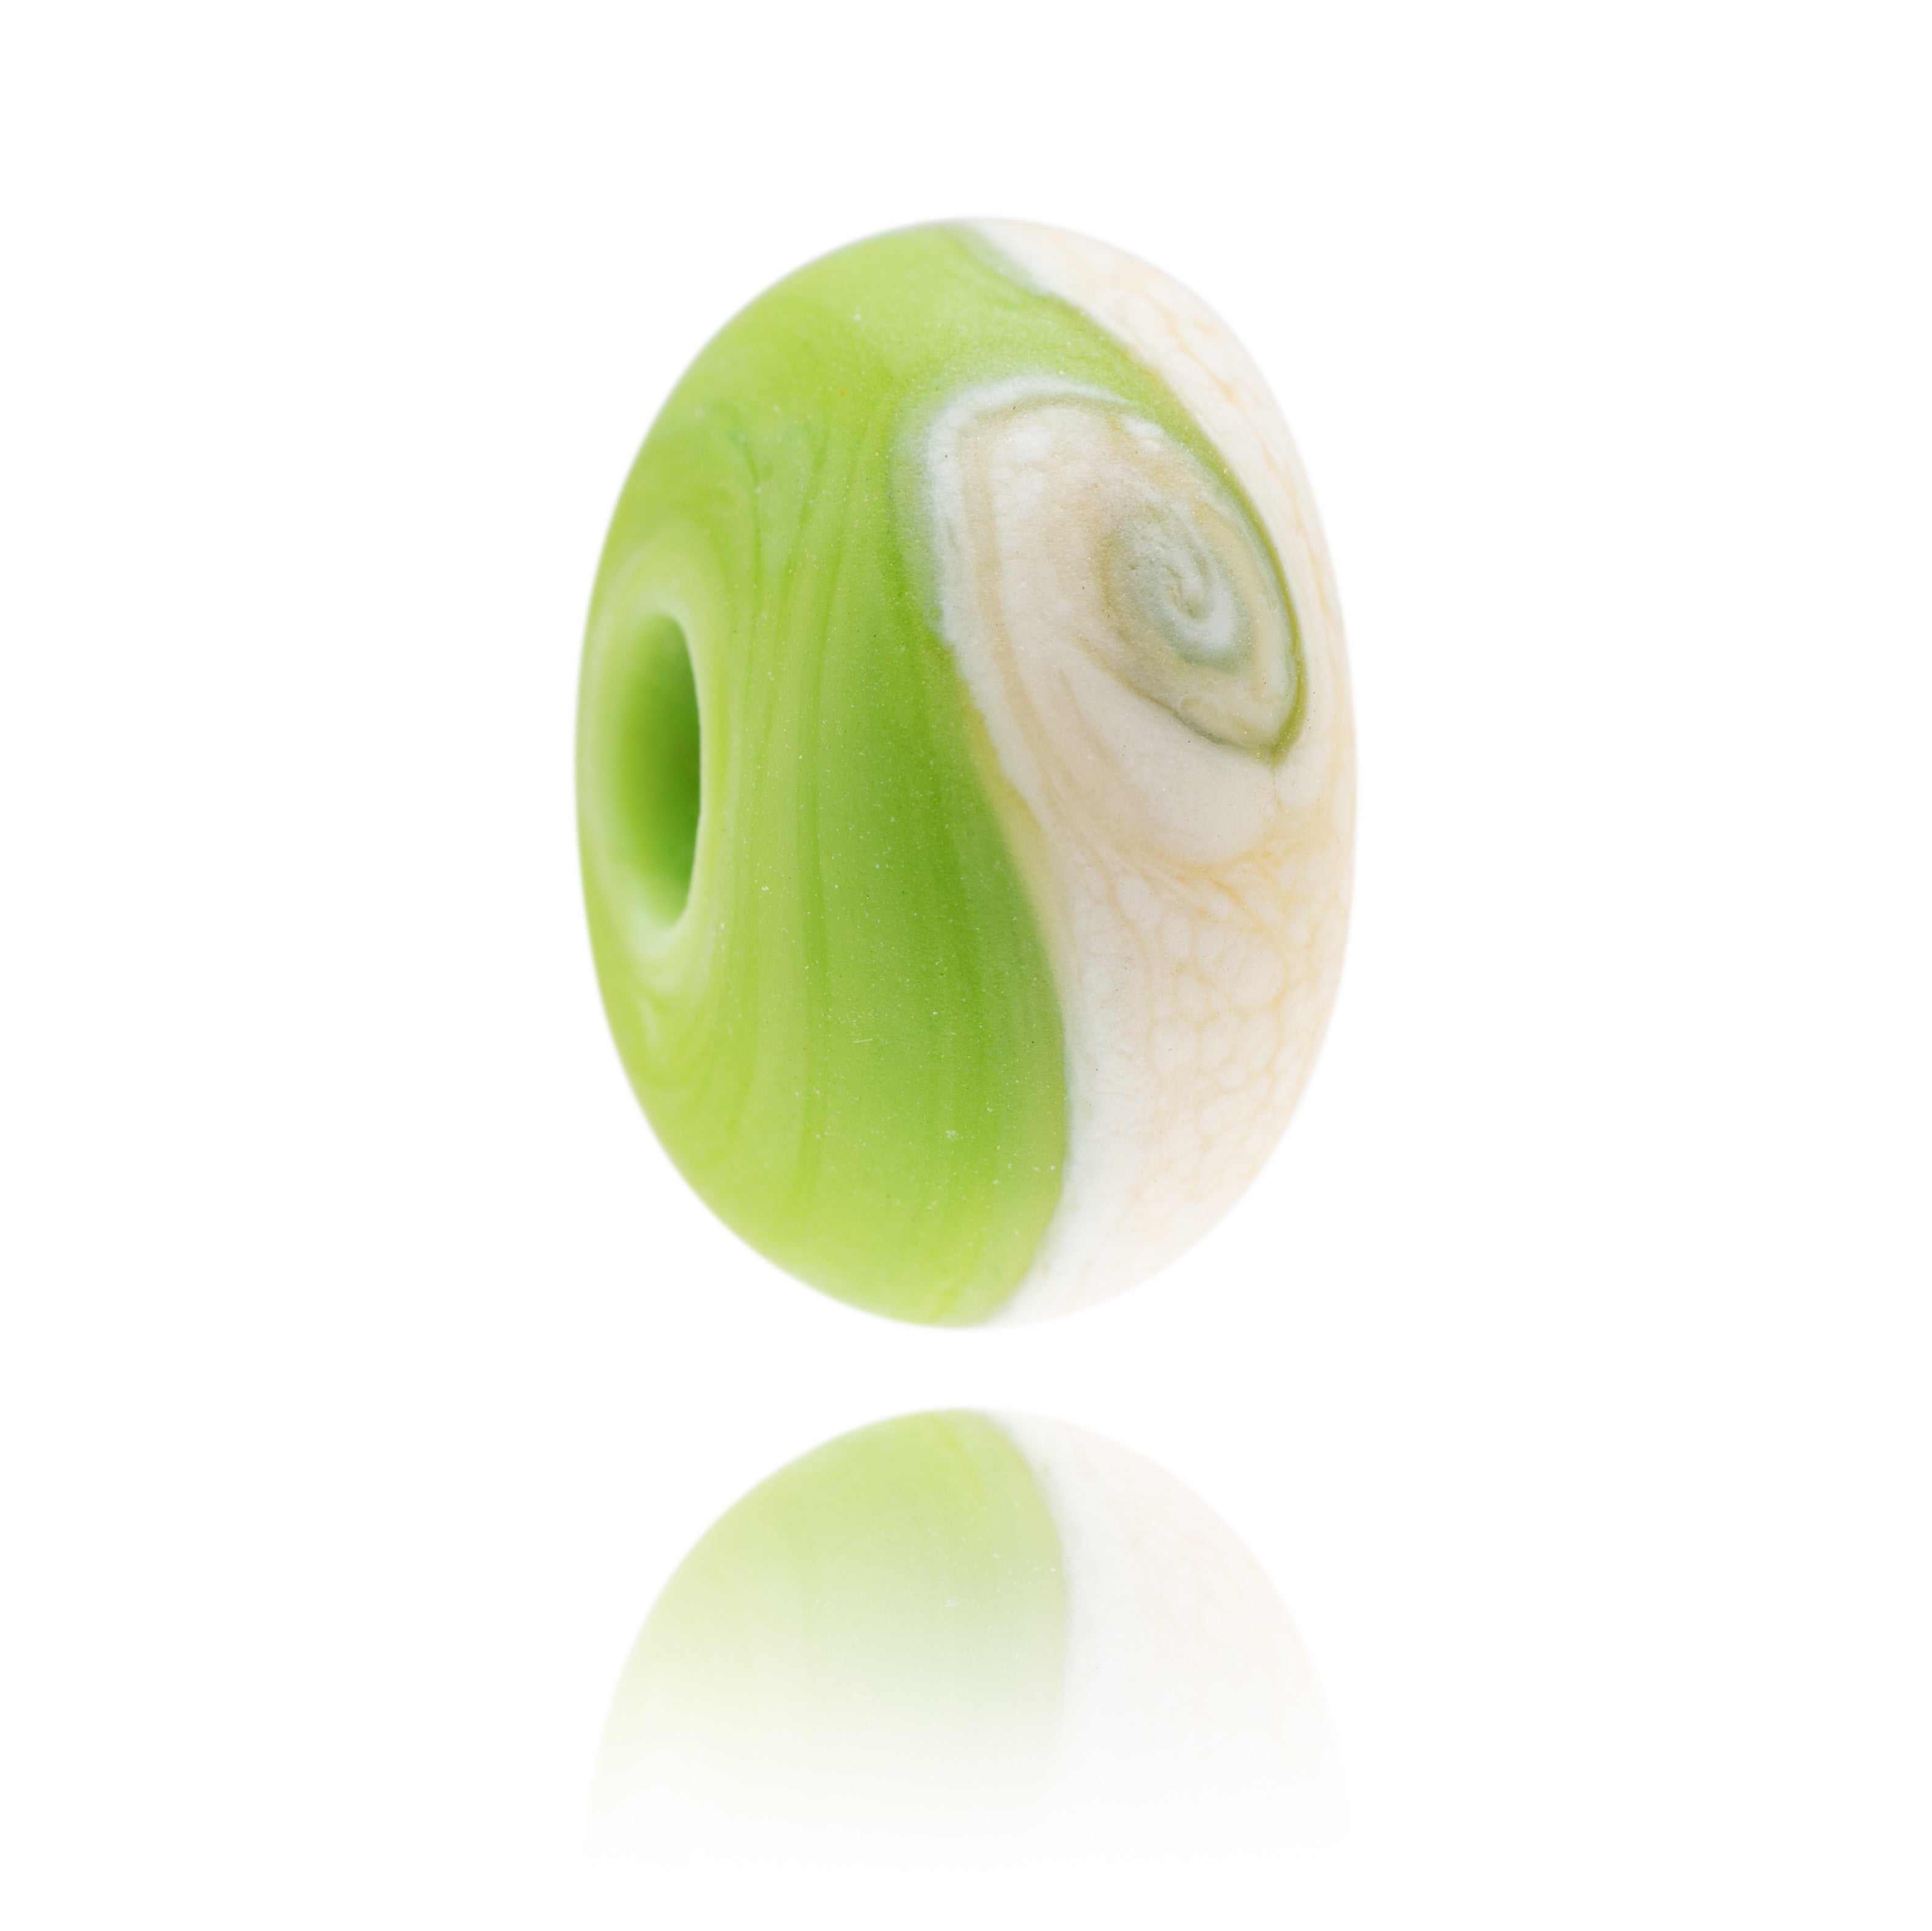 Green and ivory glass bead made to represent Southbourne Beach in Dorset.